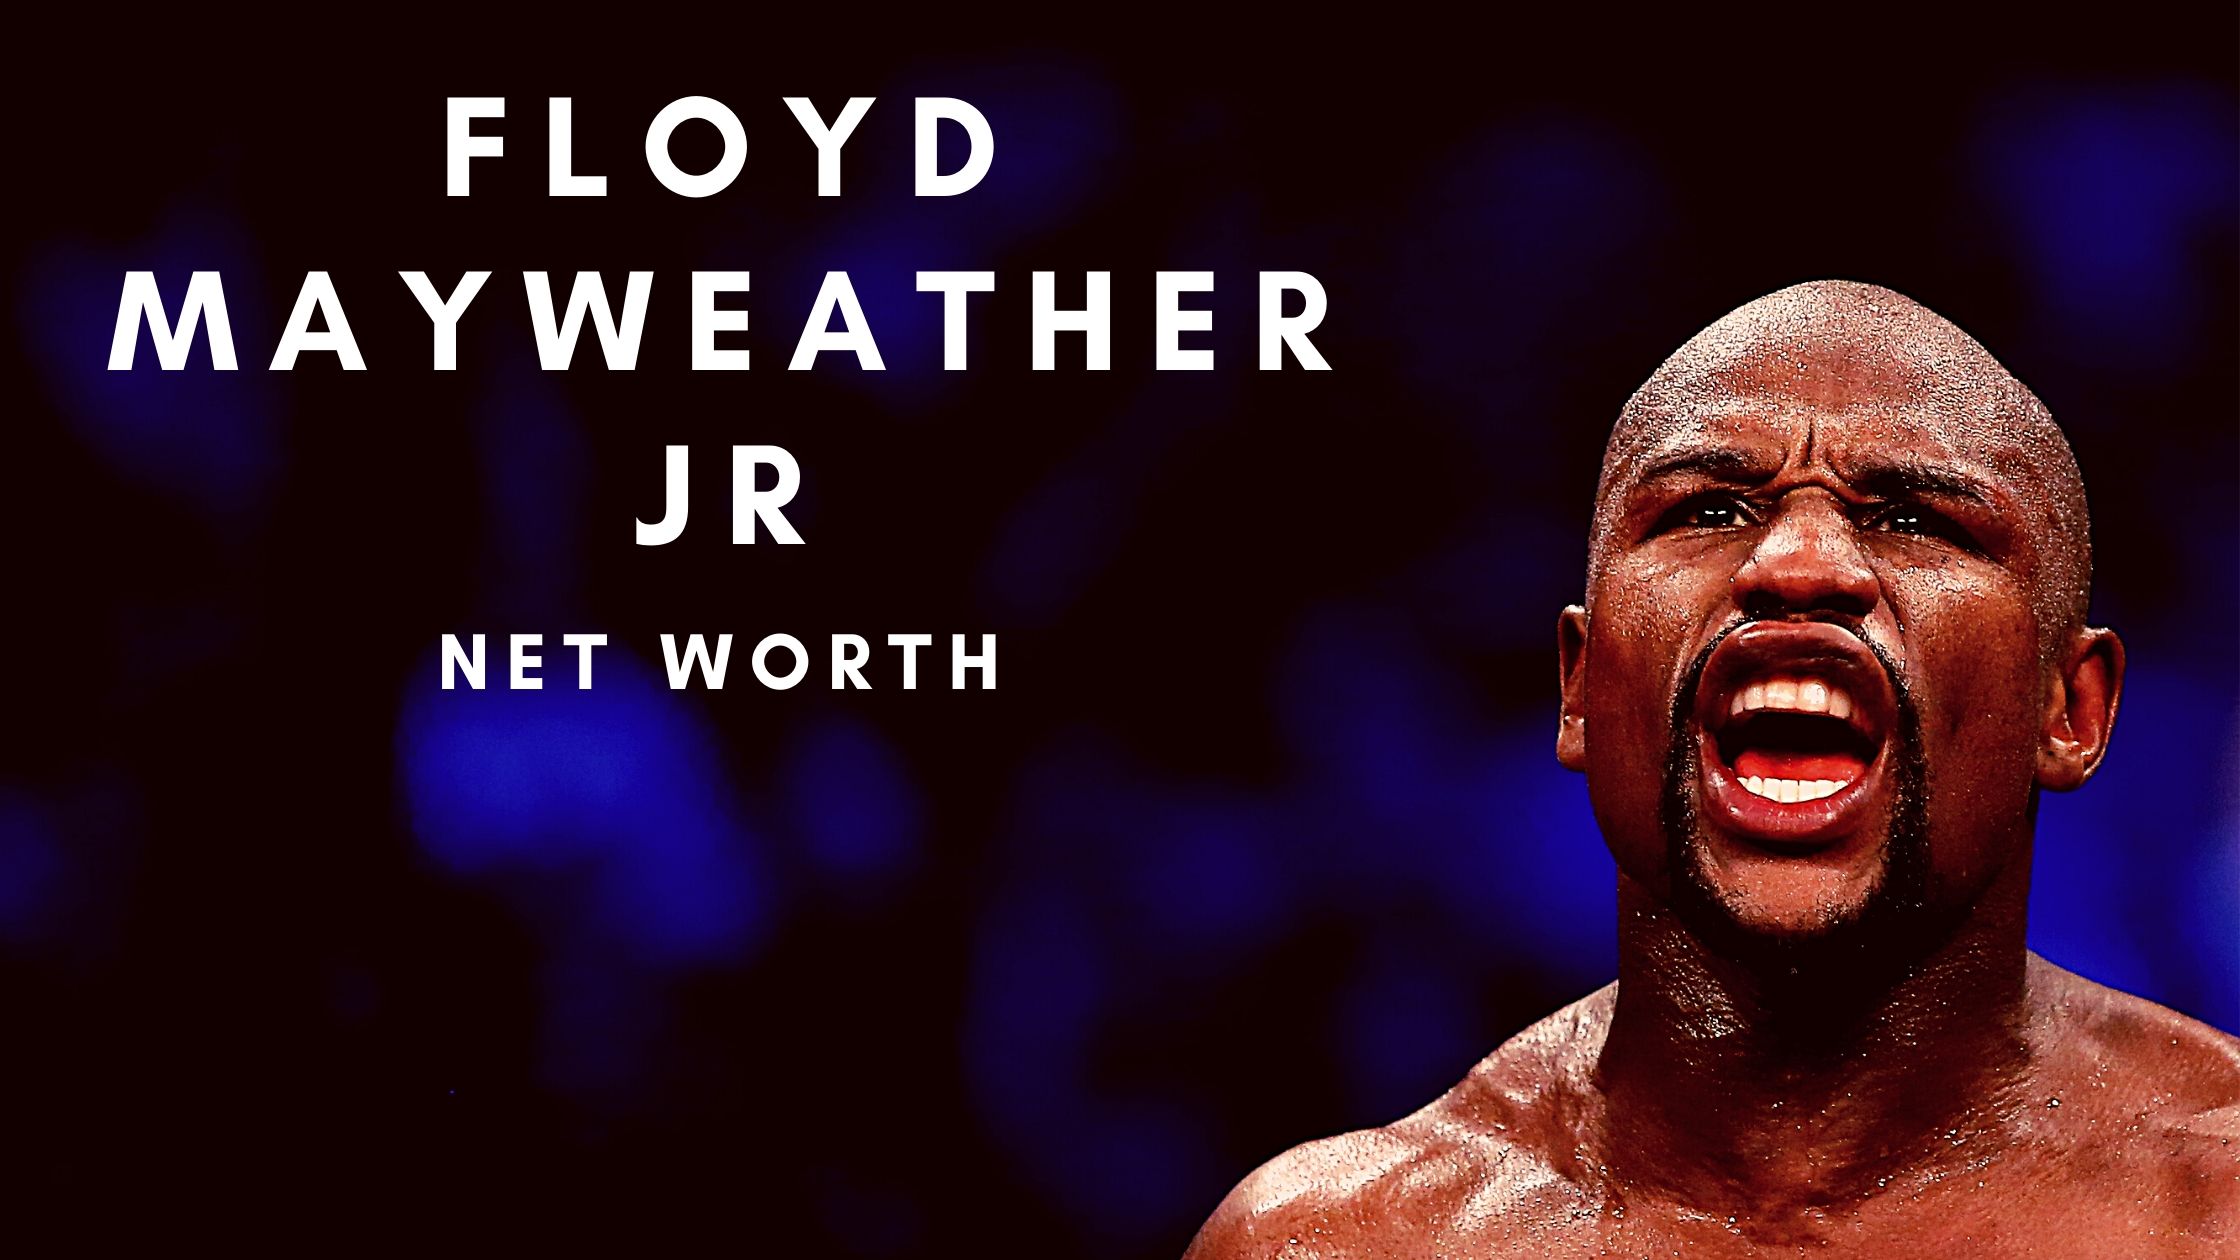 Floyd Mayweather has amassed a huge net worth thanks to his boxing skills